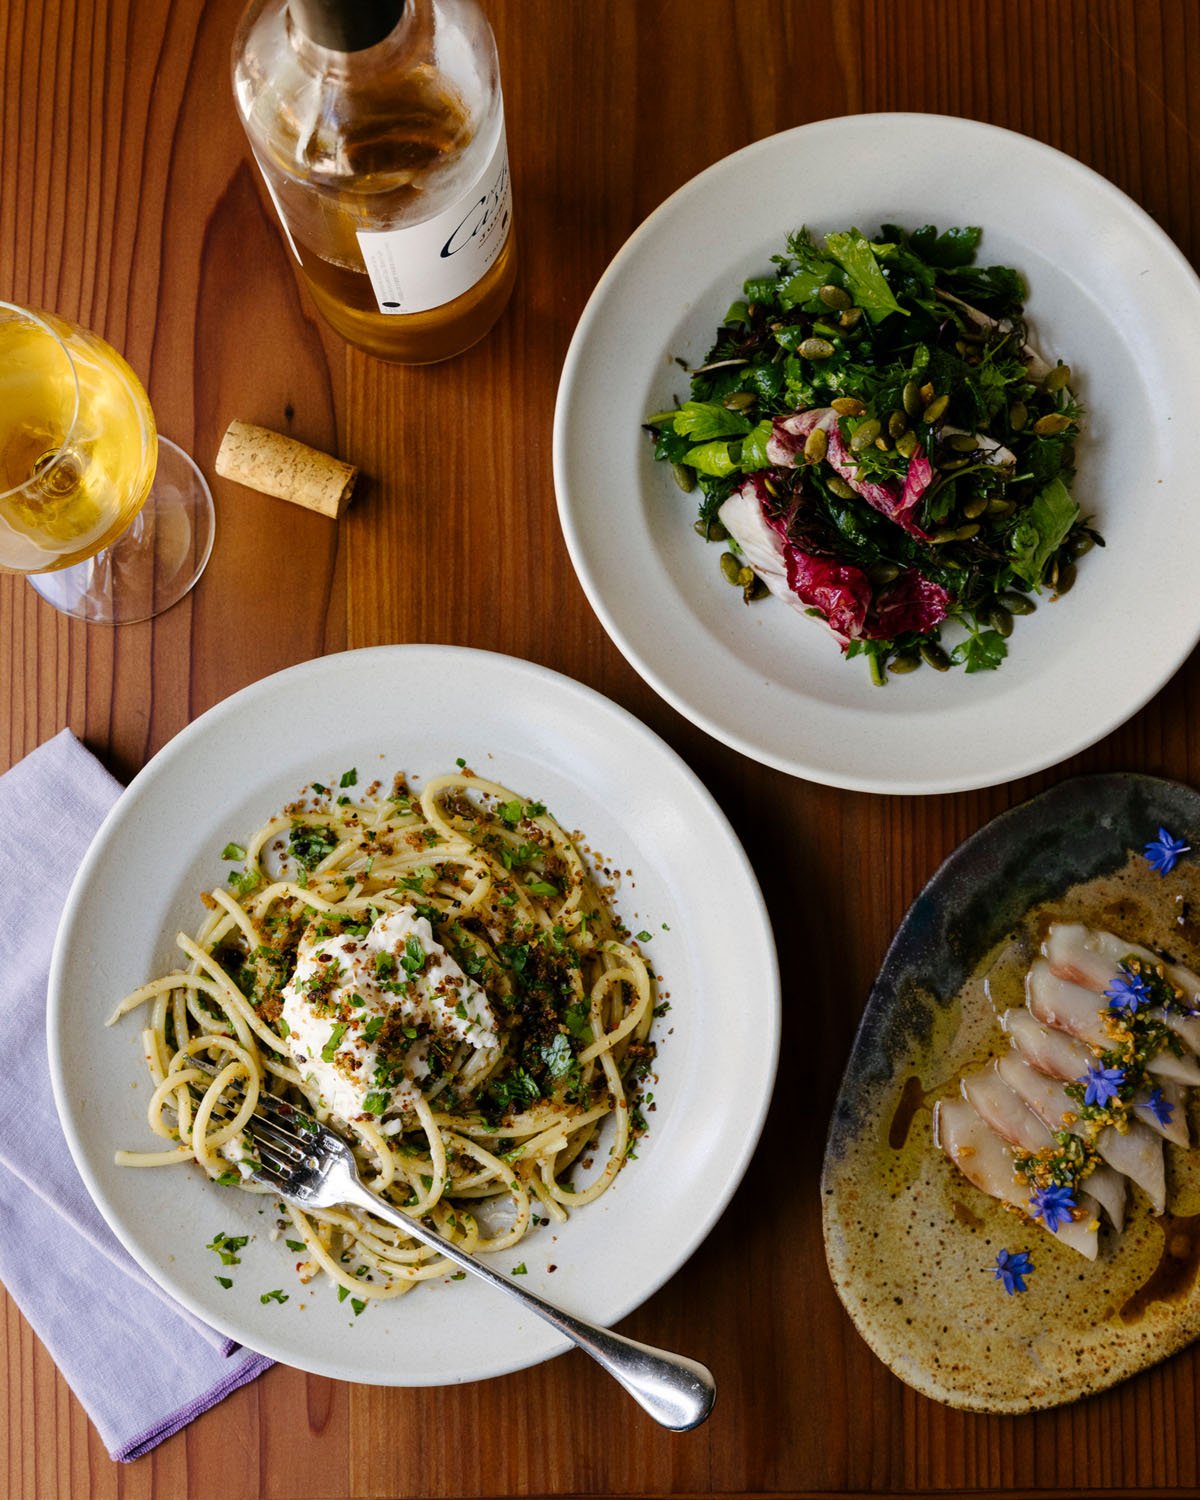  The seasonal menu at Rory's Place ranges from crudos to fresh pastas. 